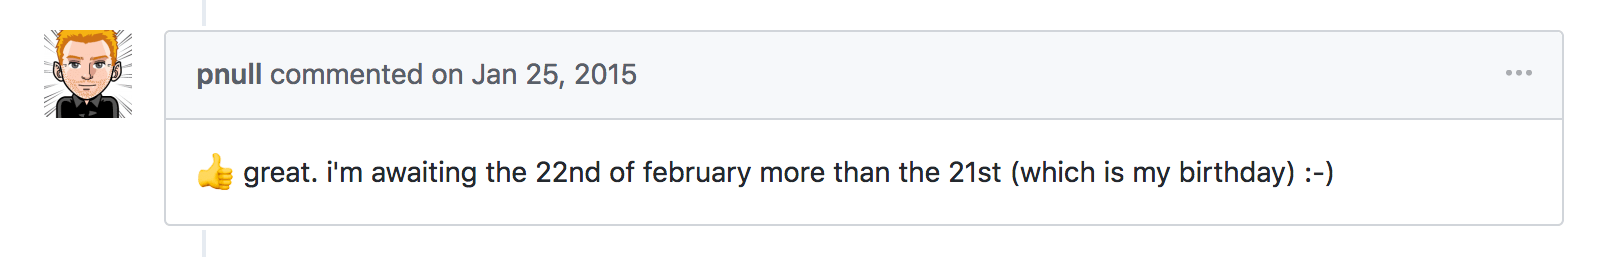 A screenshot of a user's comment, which says that he is looking forward to February 22 more than 21, which is his birthday